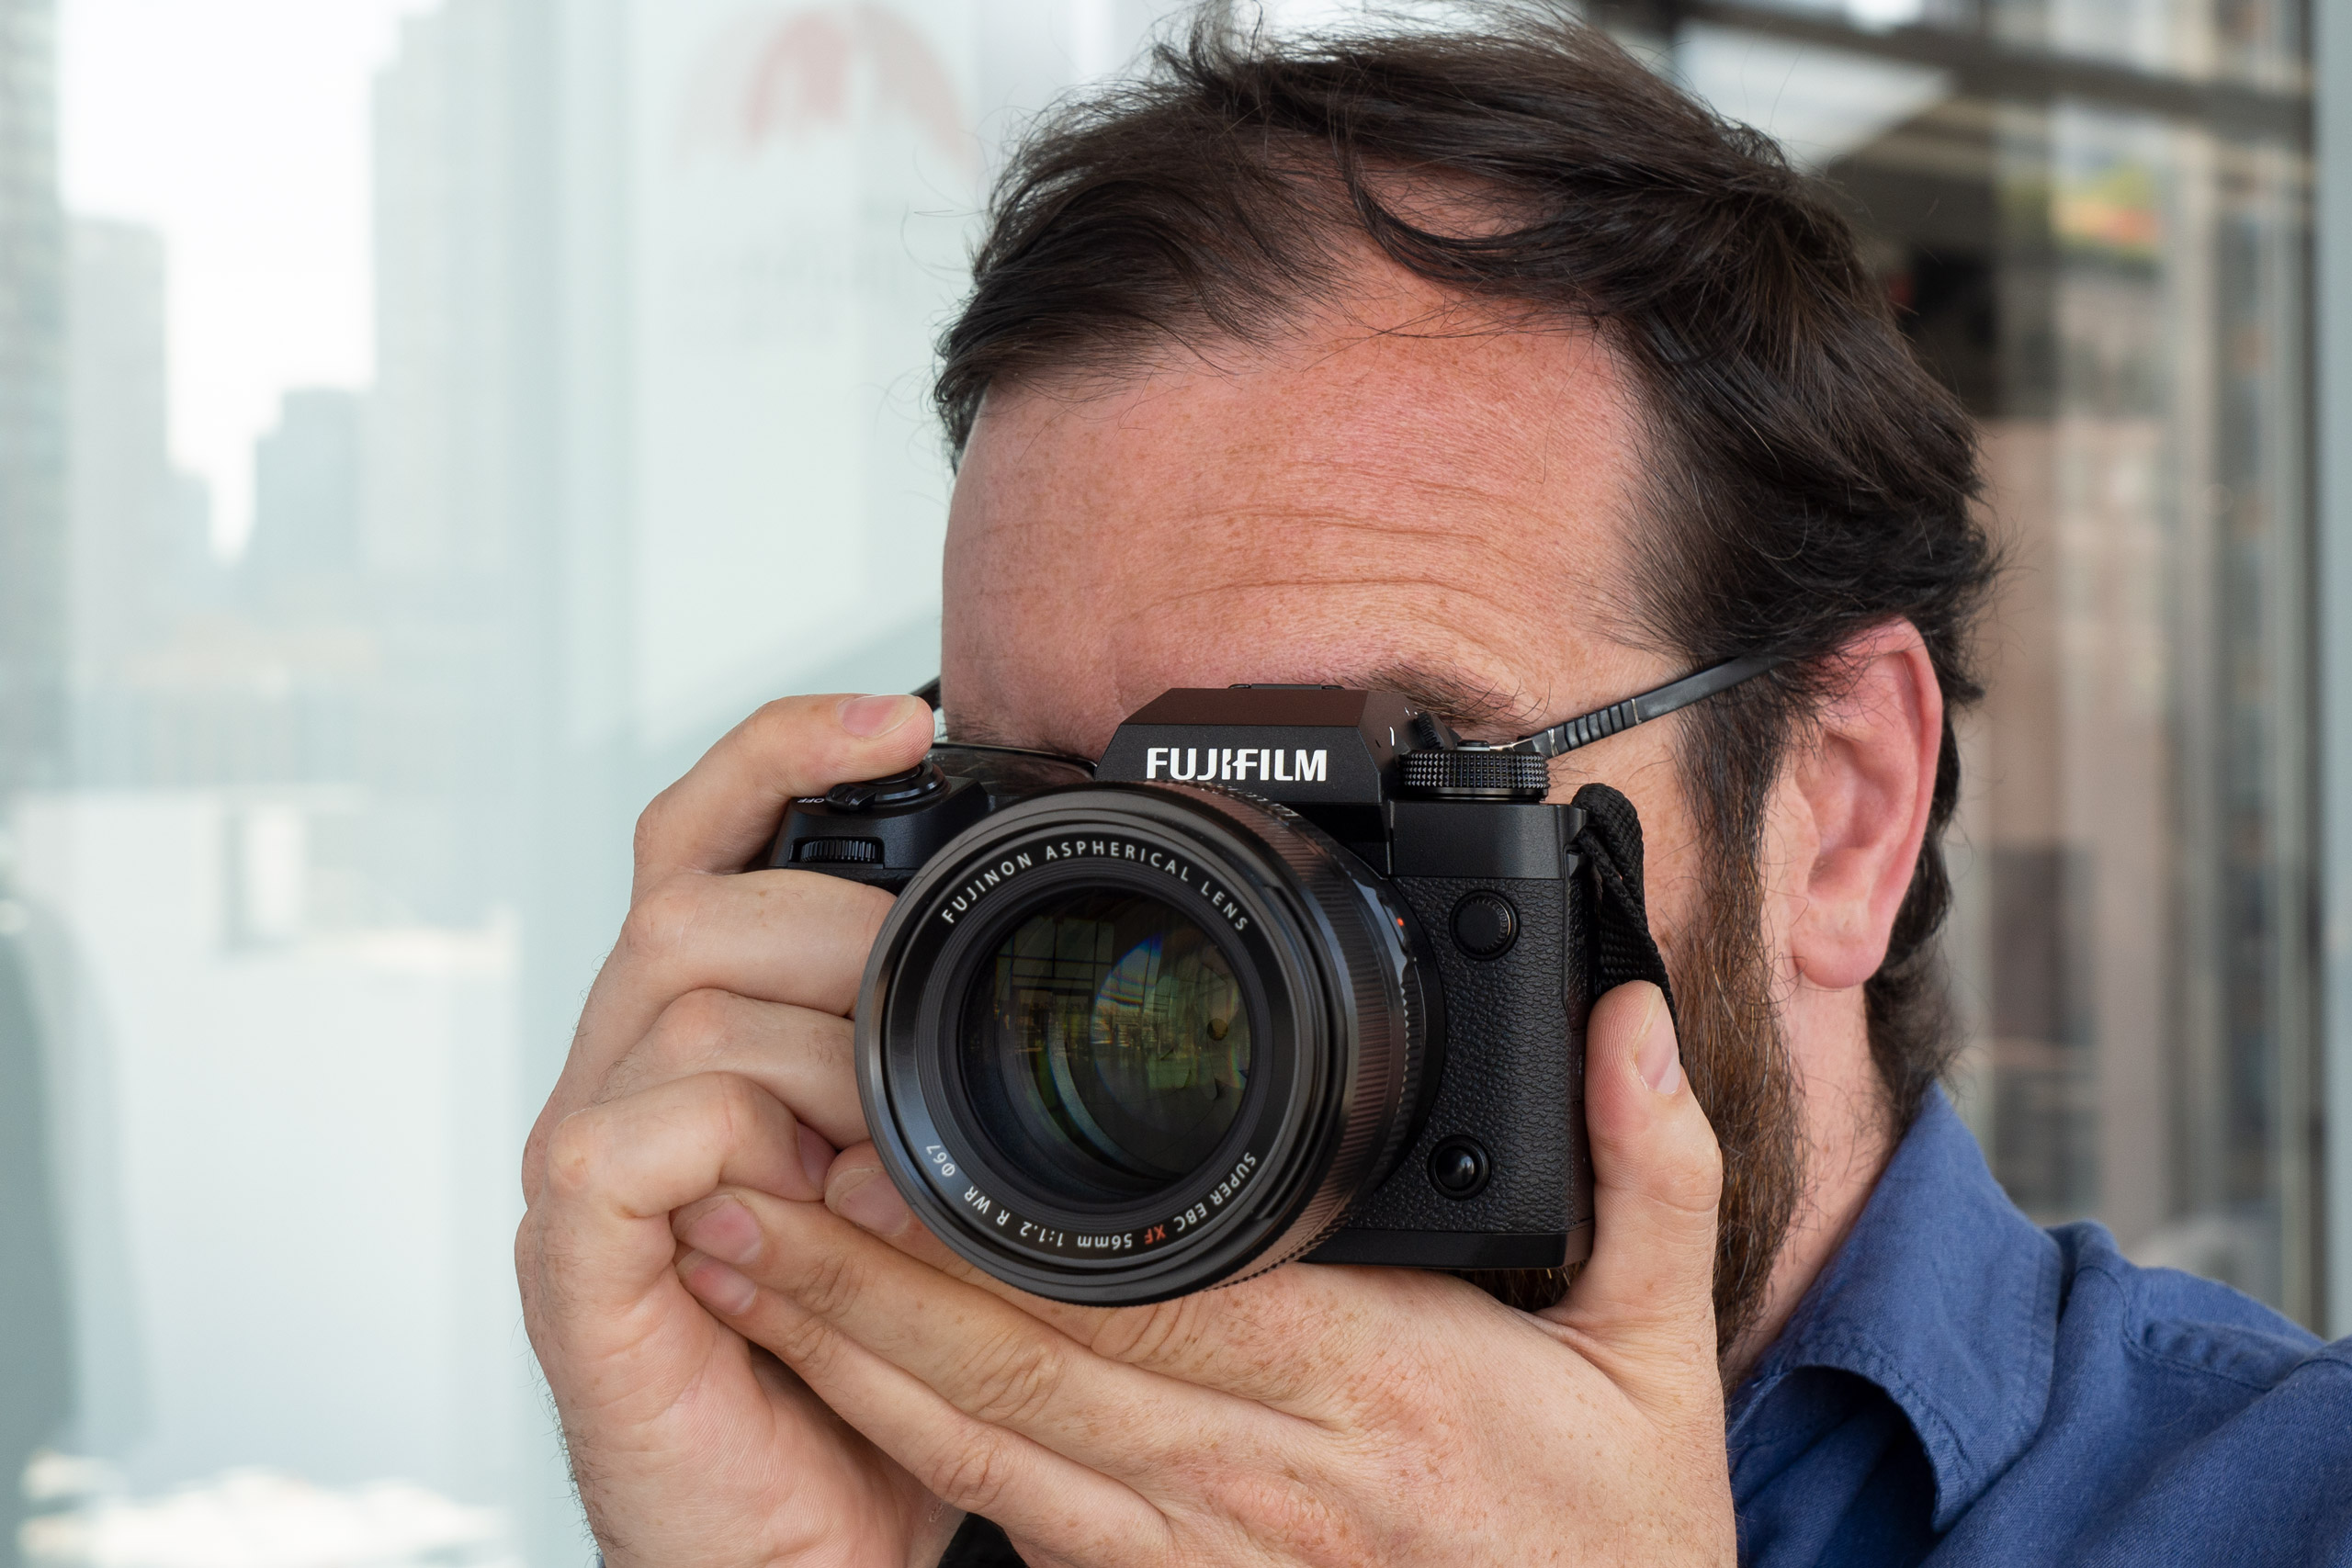 Hands-On Review: New FUJIFILM X-T5 and XF 30mm Macro Lens